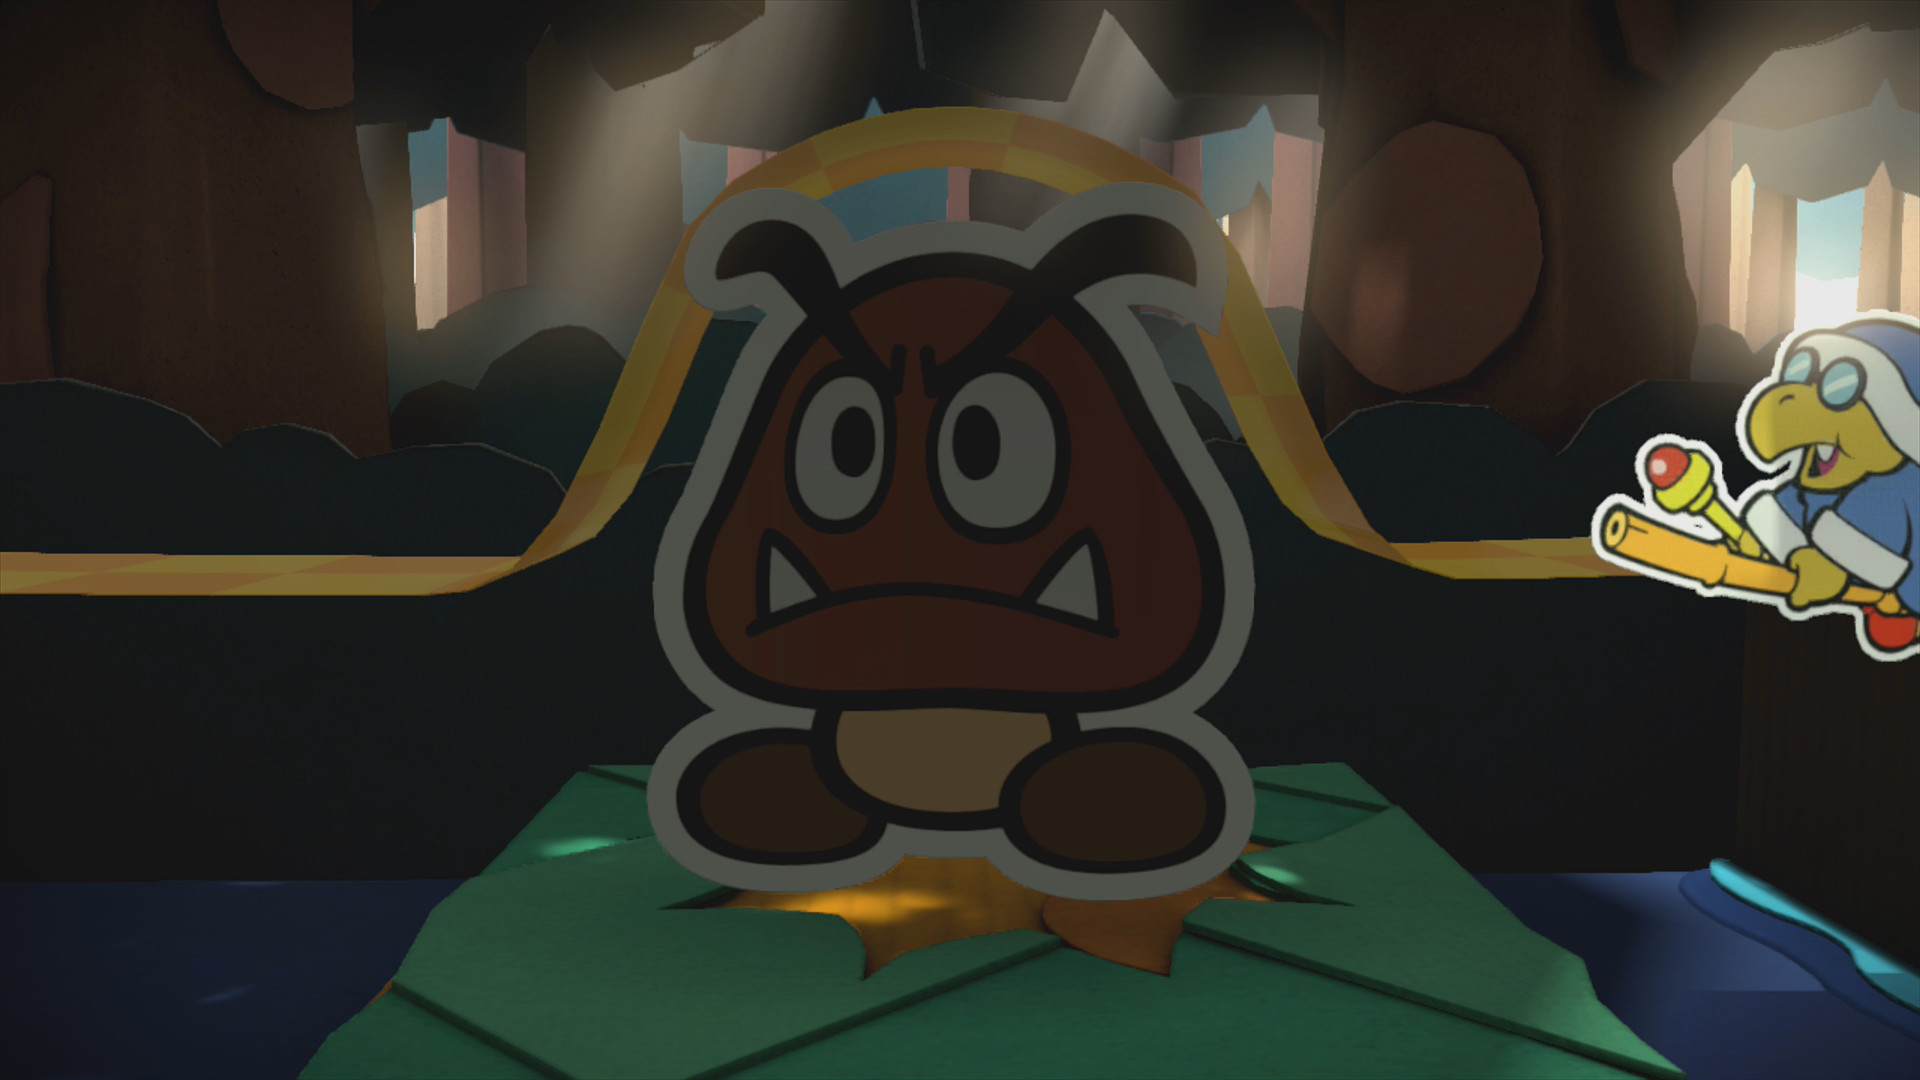 1920x1080 As usual, Kamek is up to nothing good, and you'll see it first hand. The  poor short Goomba is now a giant one that messes up the path. Walk over to  it, ...